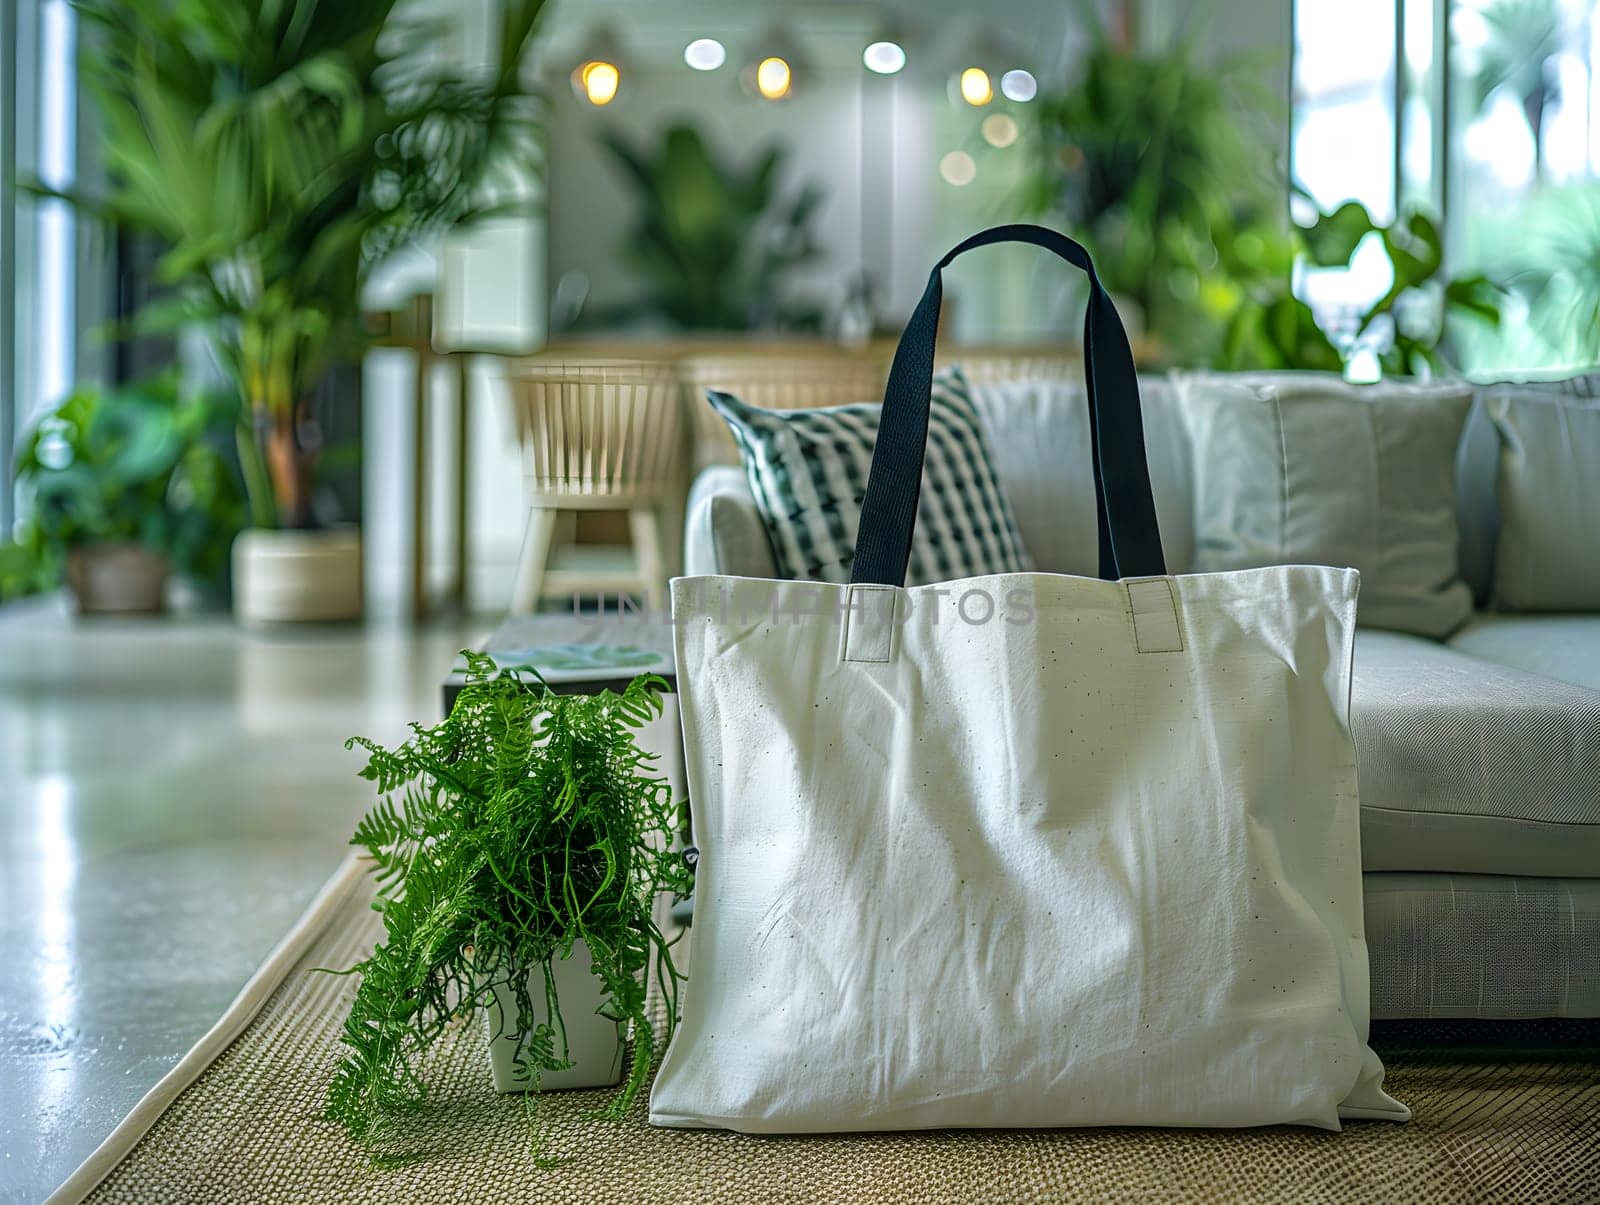 A white tote bag sits on a rug in a living room next to a couch, adding a touch of modern interior design to the hardwood flooring and green grass plant in a flowerpot